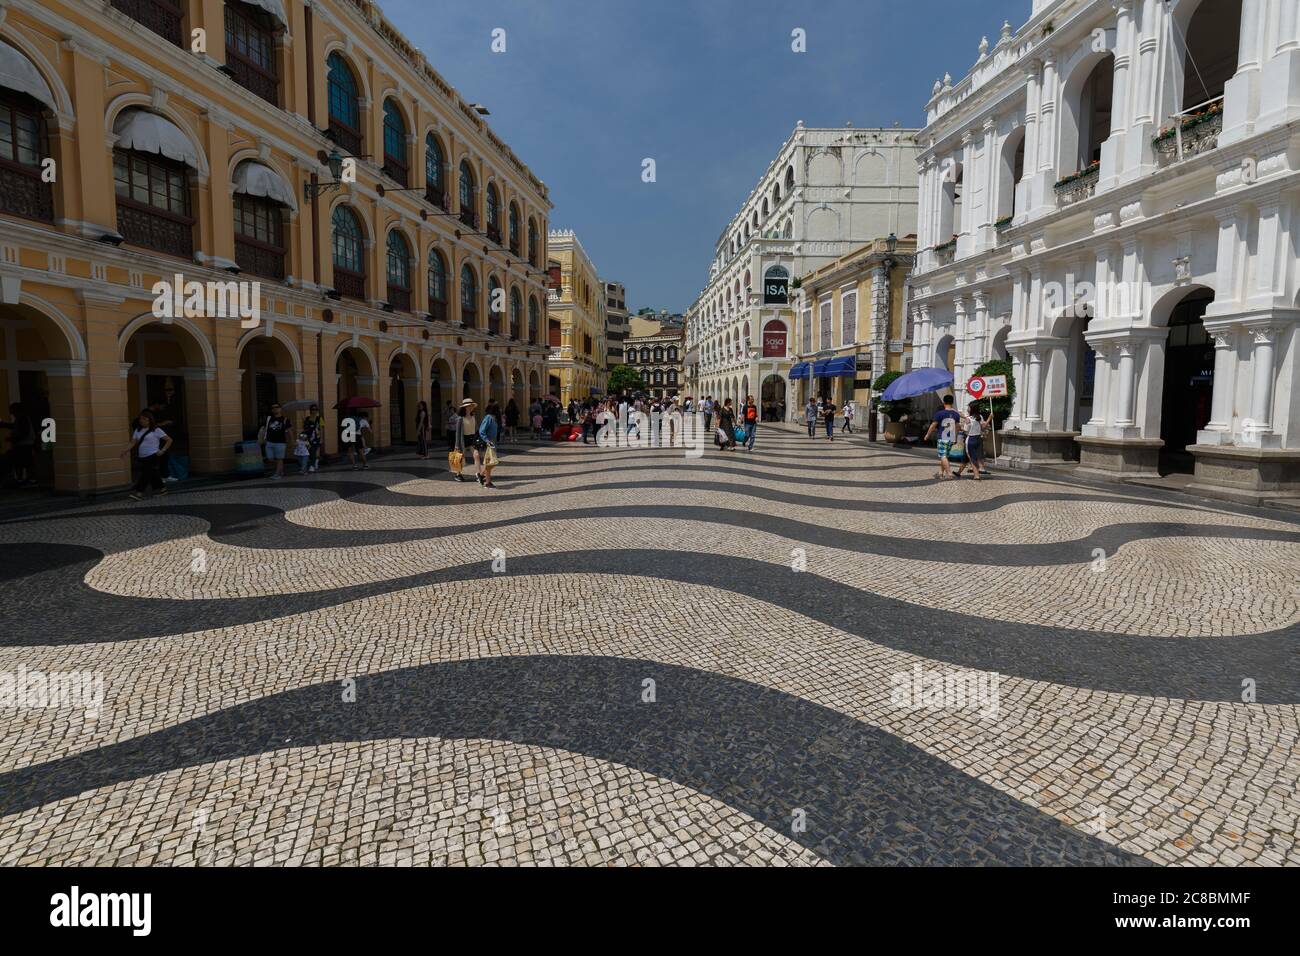 Macao, China - May 27, 2017: View on Senado Square. Famous for its wavy, striped pavement. To the left & right neo classical buildings. Part of the Un Stock Photo